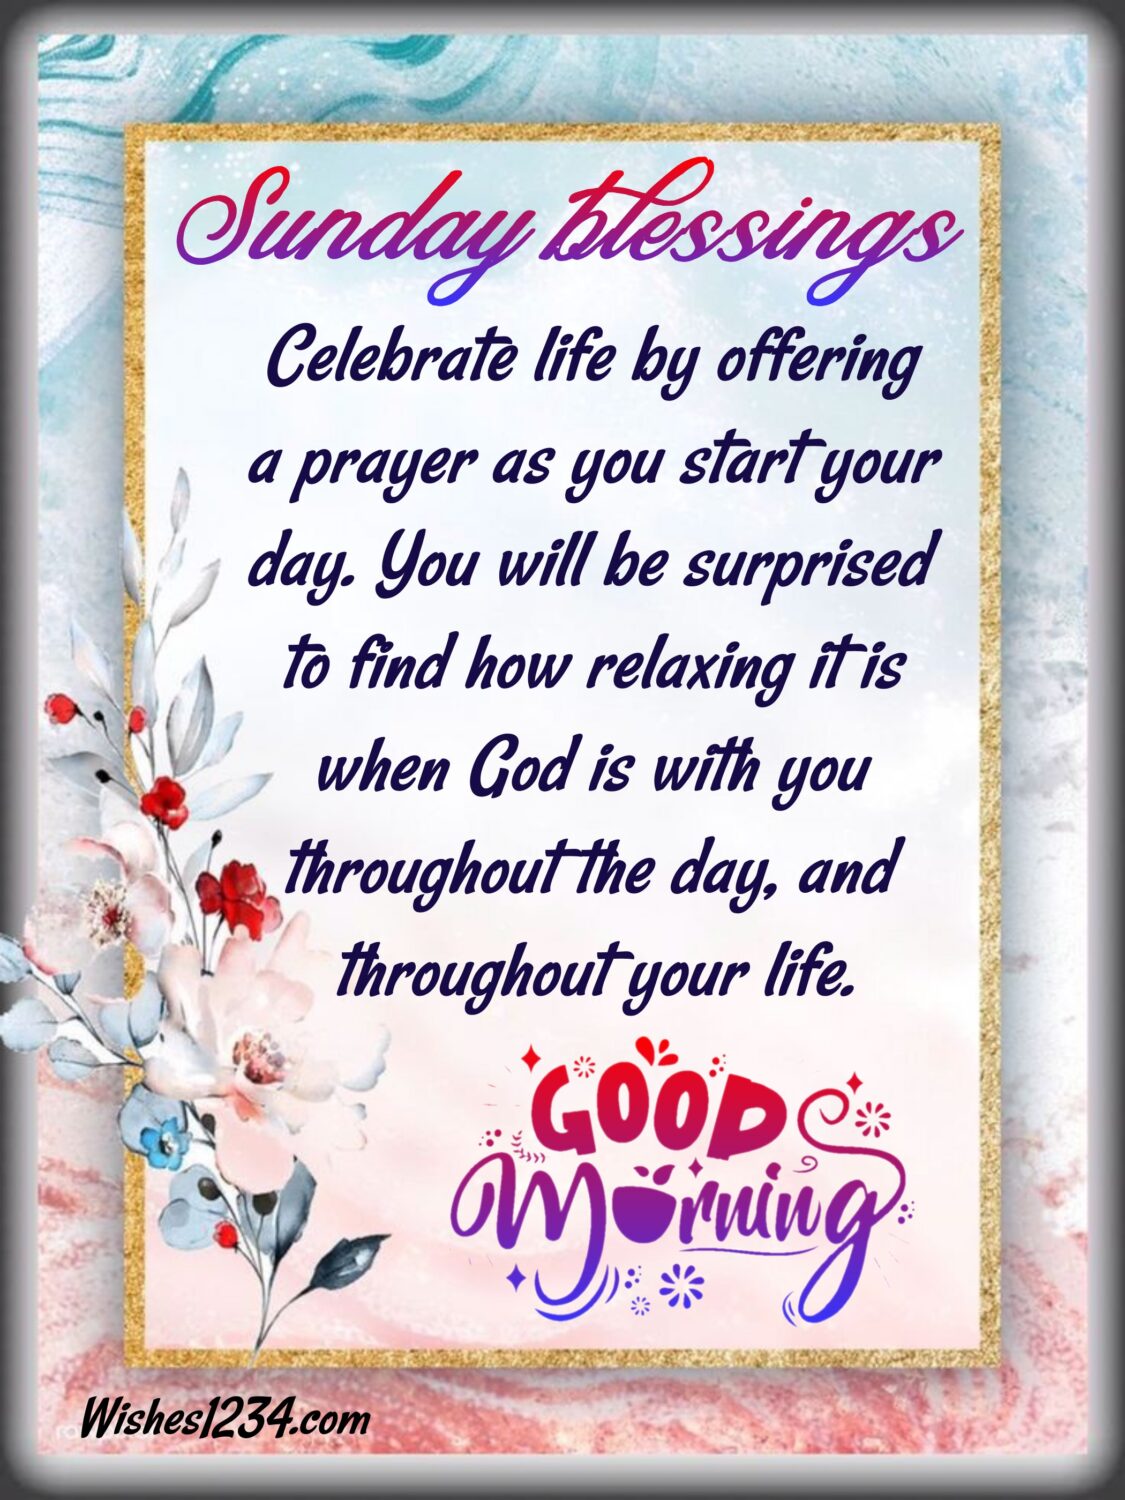 Gliter wallpaper with flowers, Sunday blessings quotes for friends.